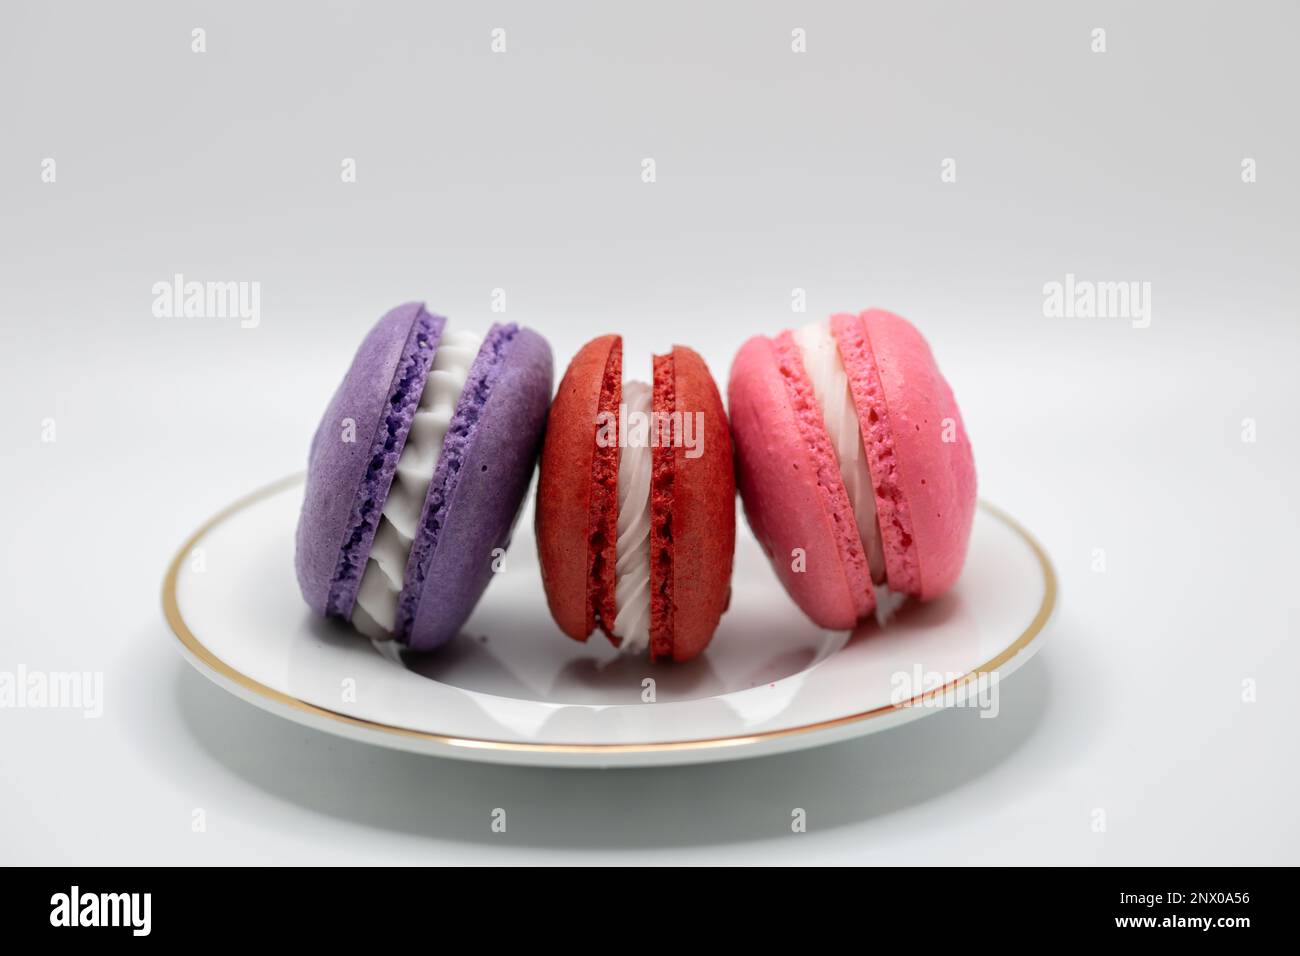 This image shows a close-up view of colorful French macaron confections with a cream filling, on a white background. Stock Photo